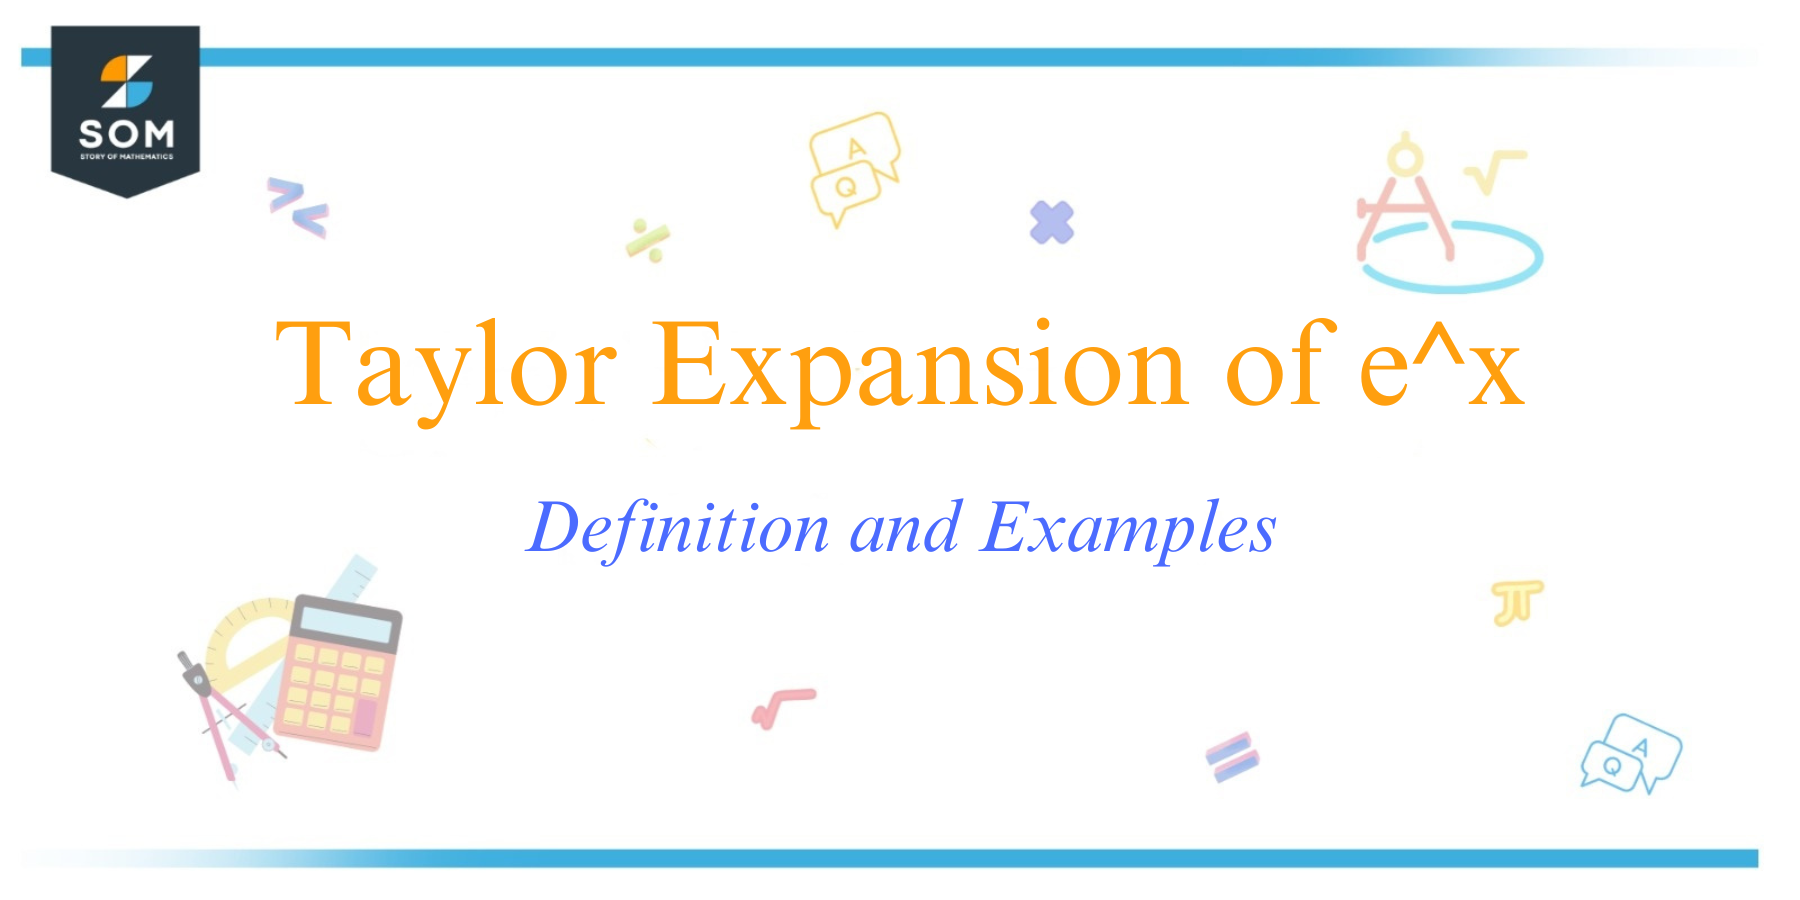 Taylor Expansion of e power x Definition and